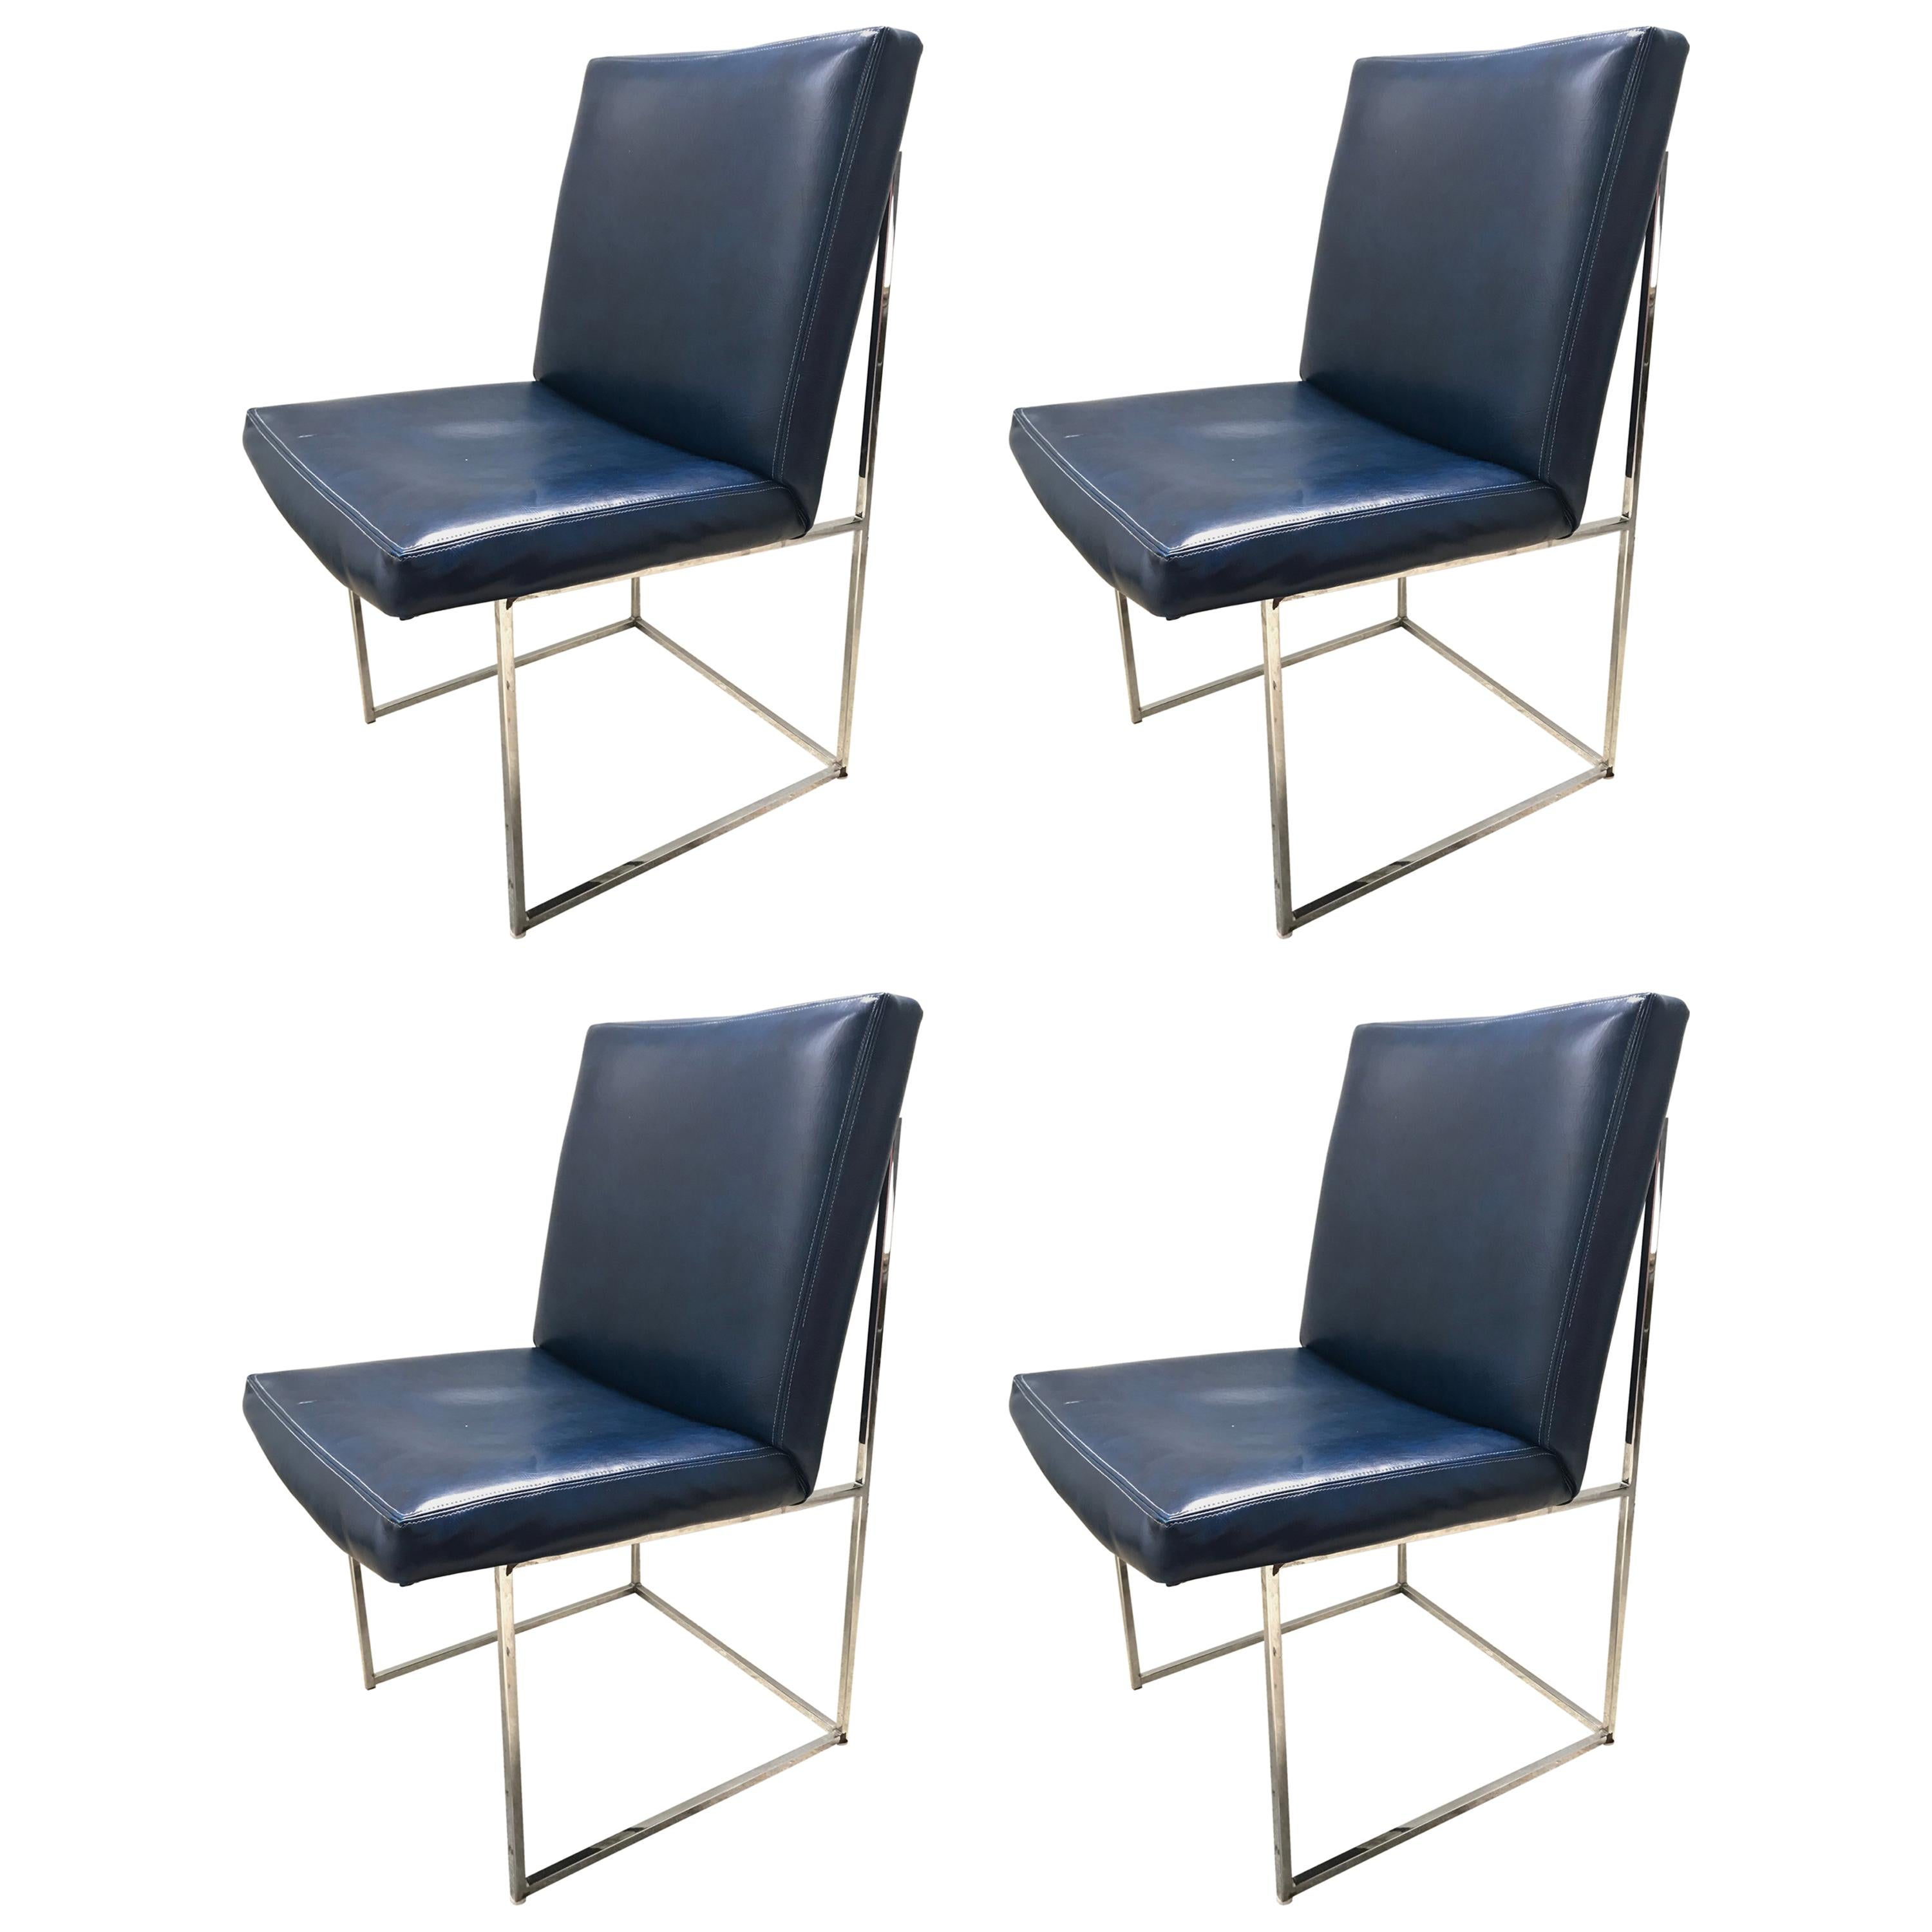 Set of four Milo Baughman Thin-Line Dining Chairs